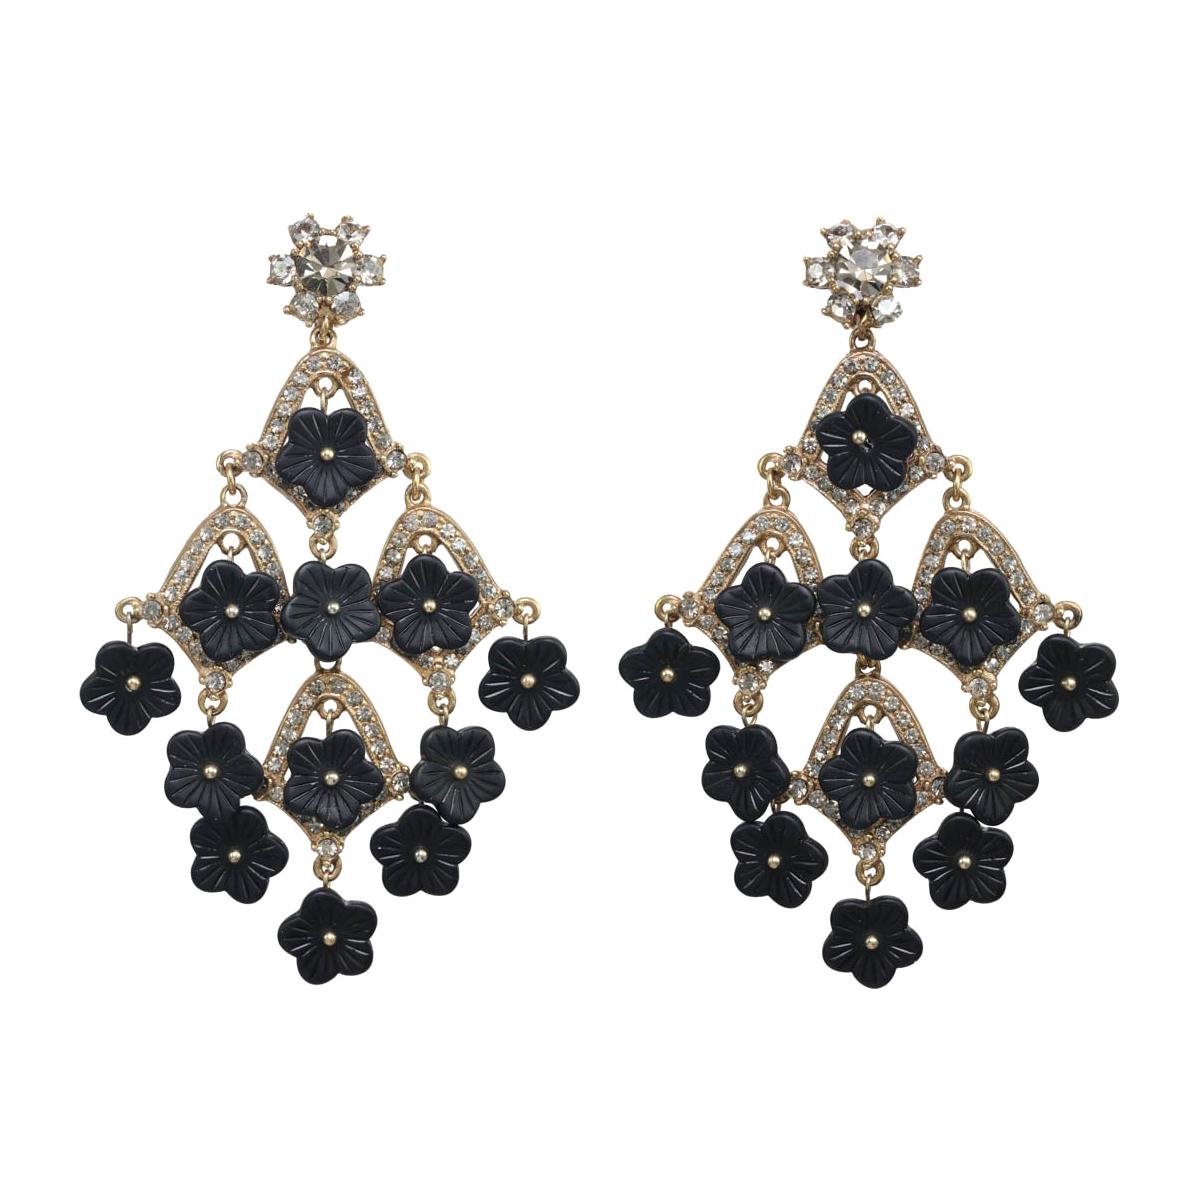 CINER Black Floral and Rhinestone Chandelier CLIP Earring